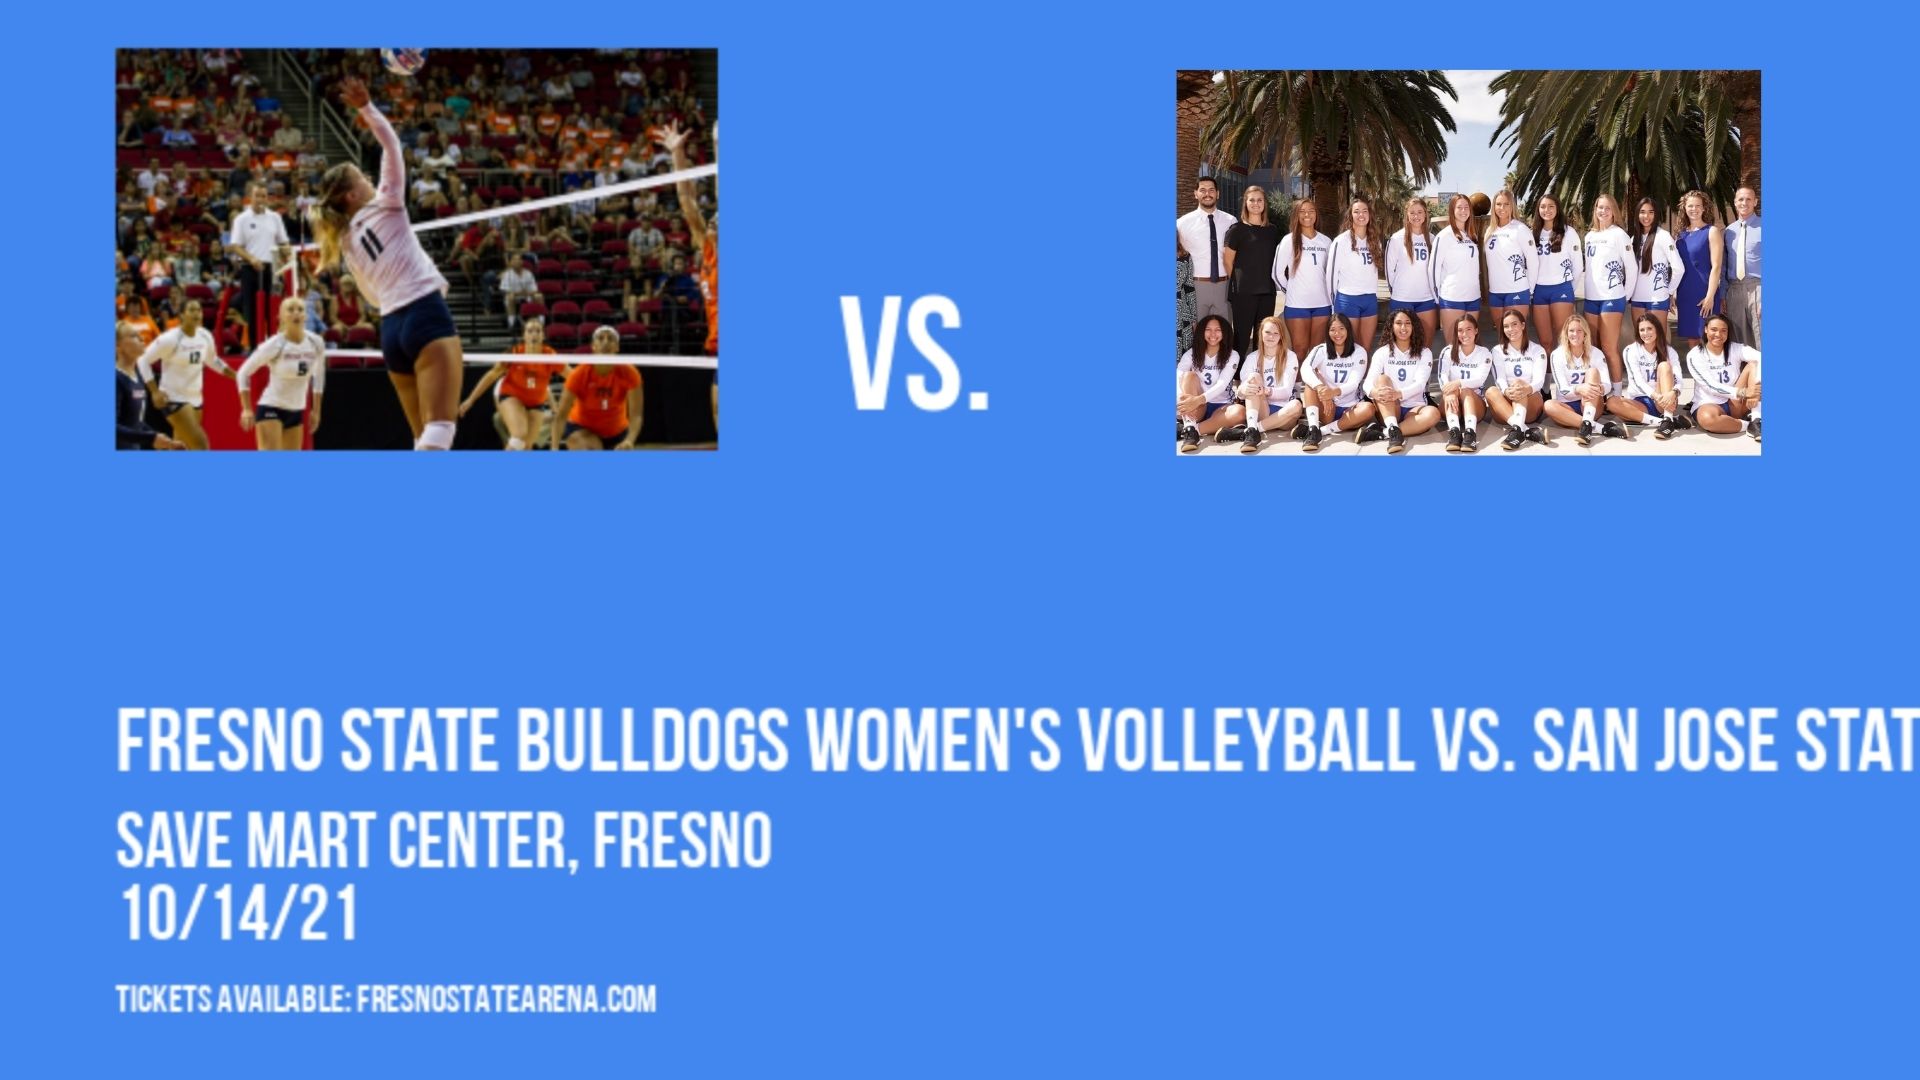 Fresno State Bulldogs Women's Volleyball vs. San Jose State Spartans at Save Mart Center